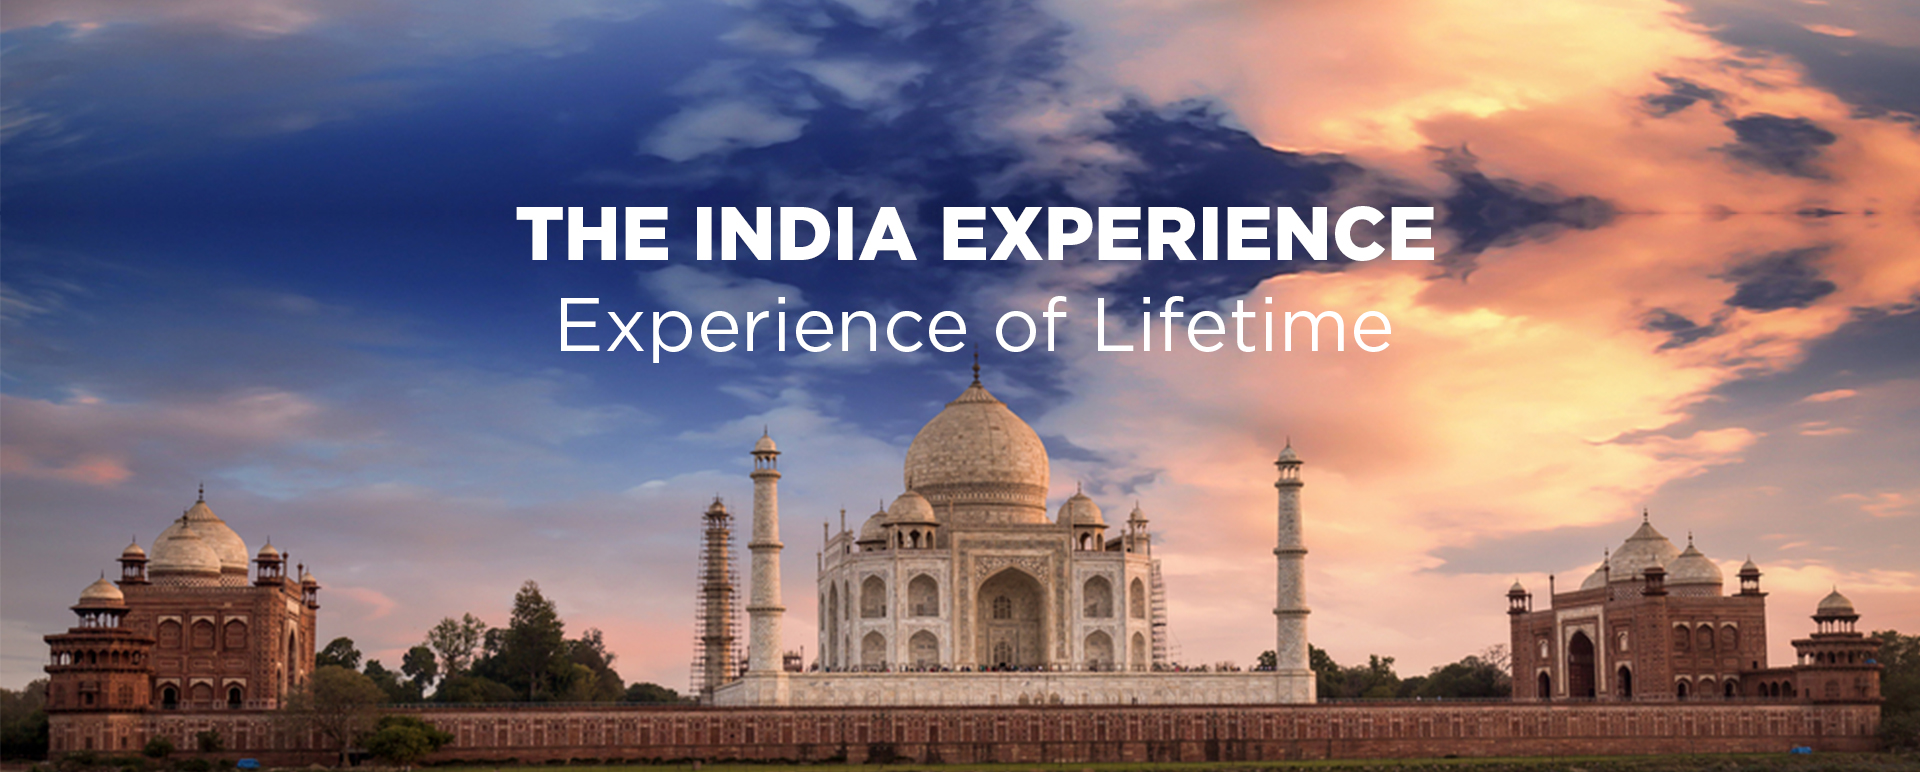 India-exp-banner